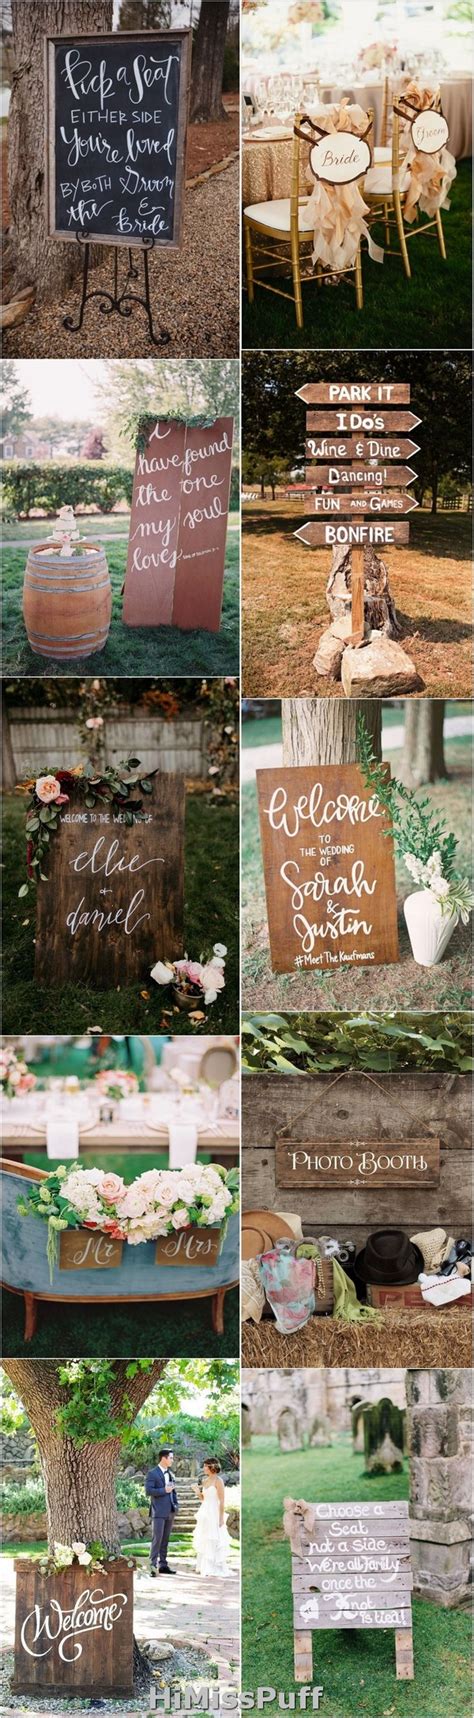 100 Clever Wedding Signs Your Guests Will Get A Kick Out Of